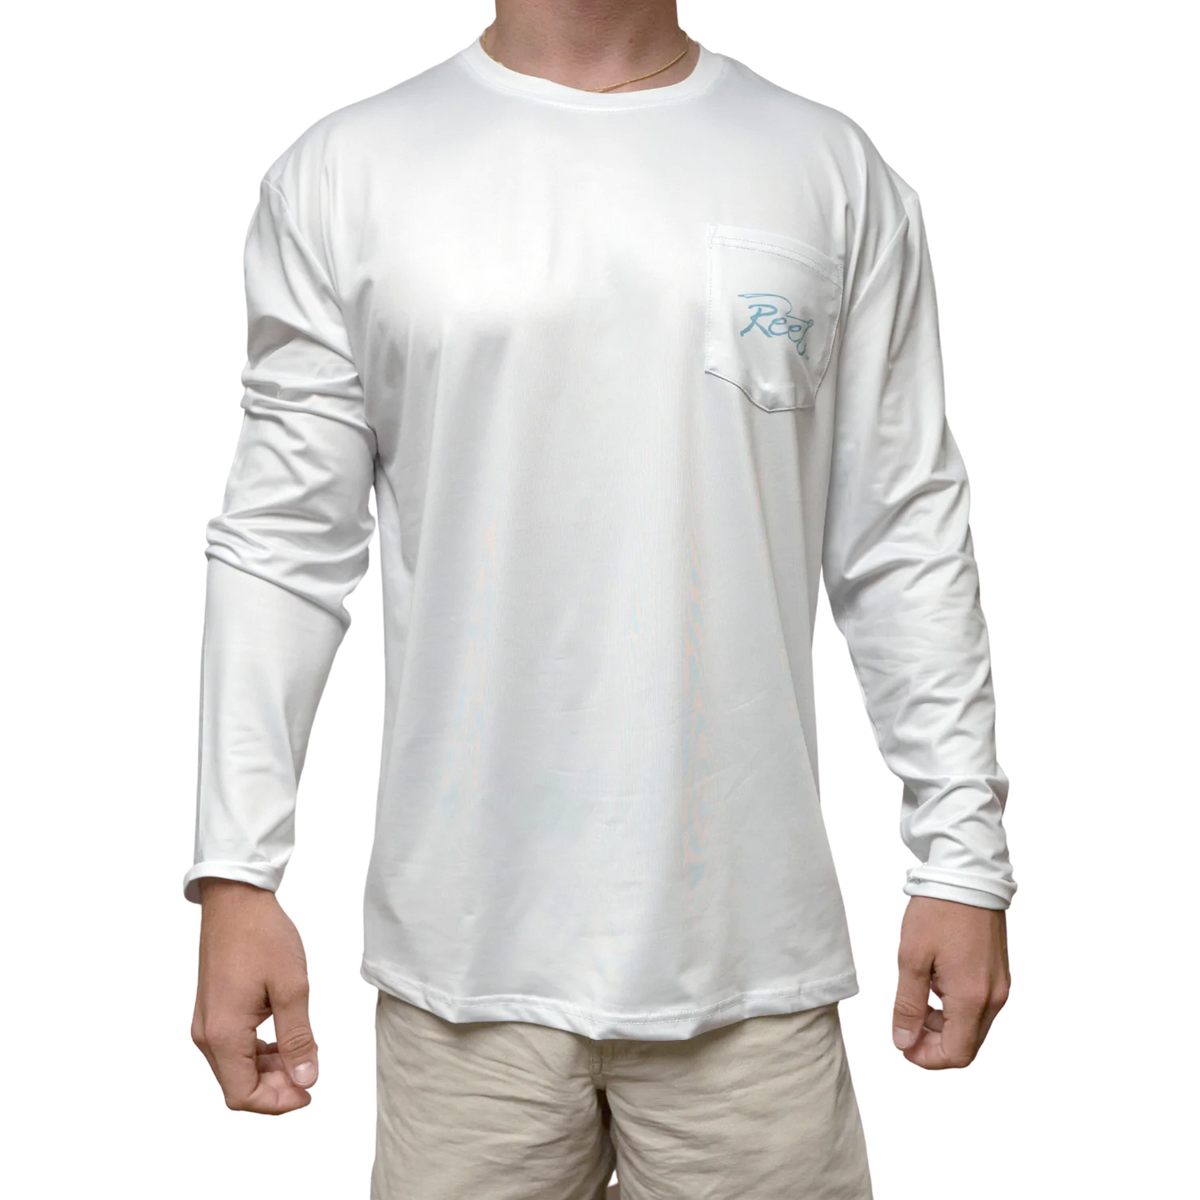 Reel White Performance Long Sleeve T-Shirt with Diamond Label